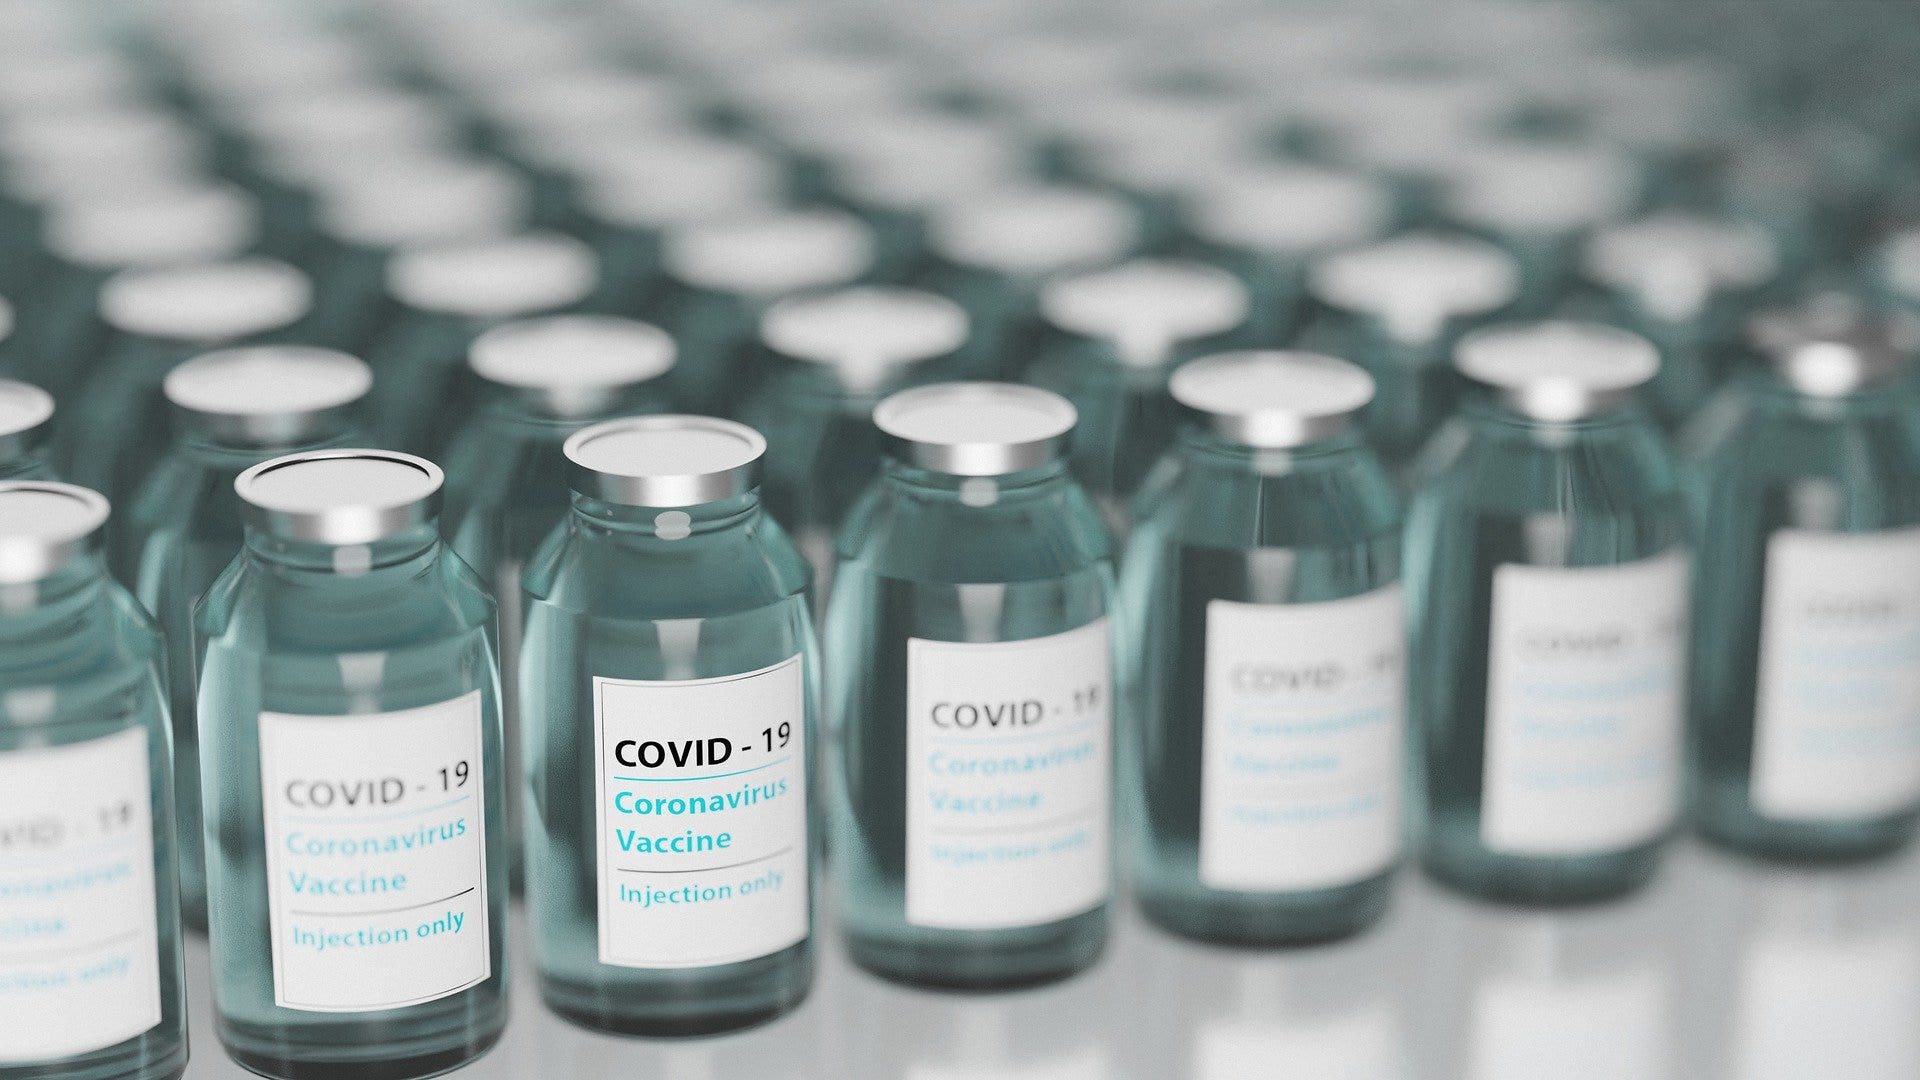 Emergent BioSolutions Has Supply Of 60M Johnson & Johnson COVID-19 Vaccine Doses Awaiting Approval: Bloomberg